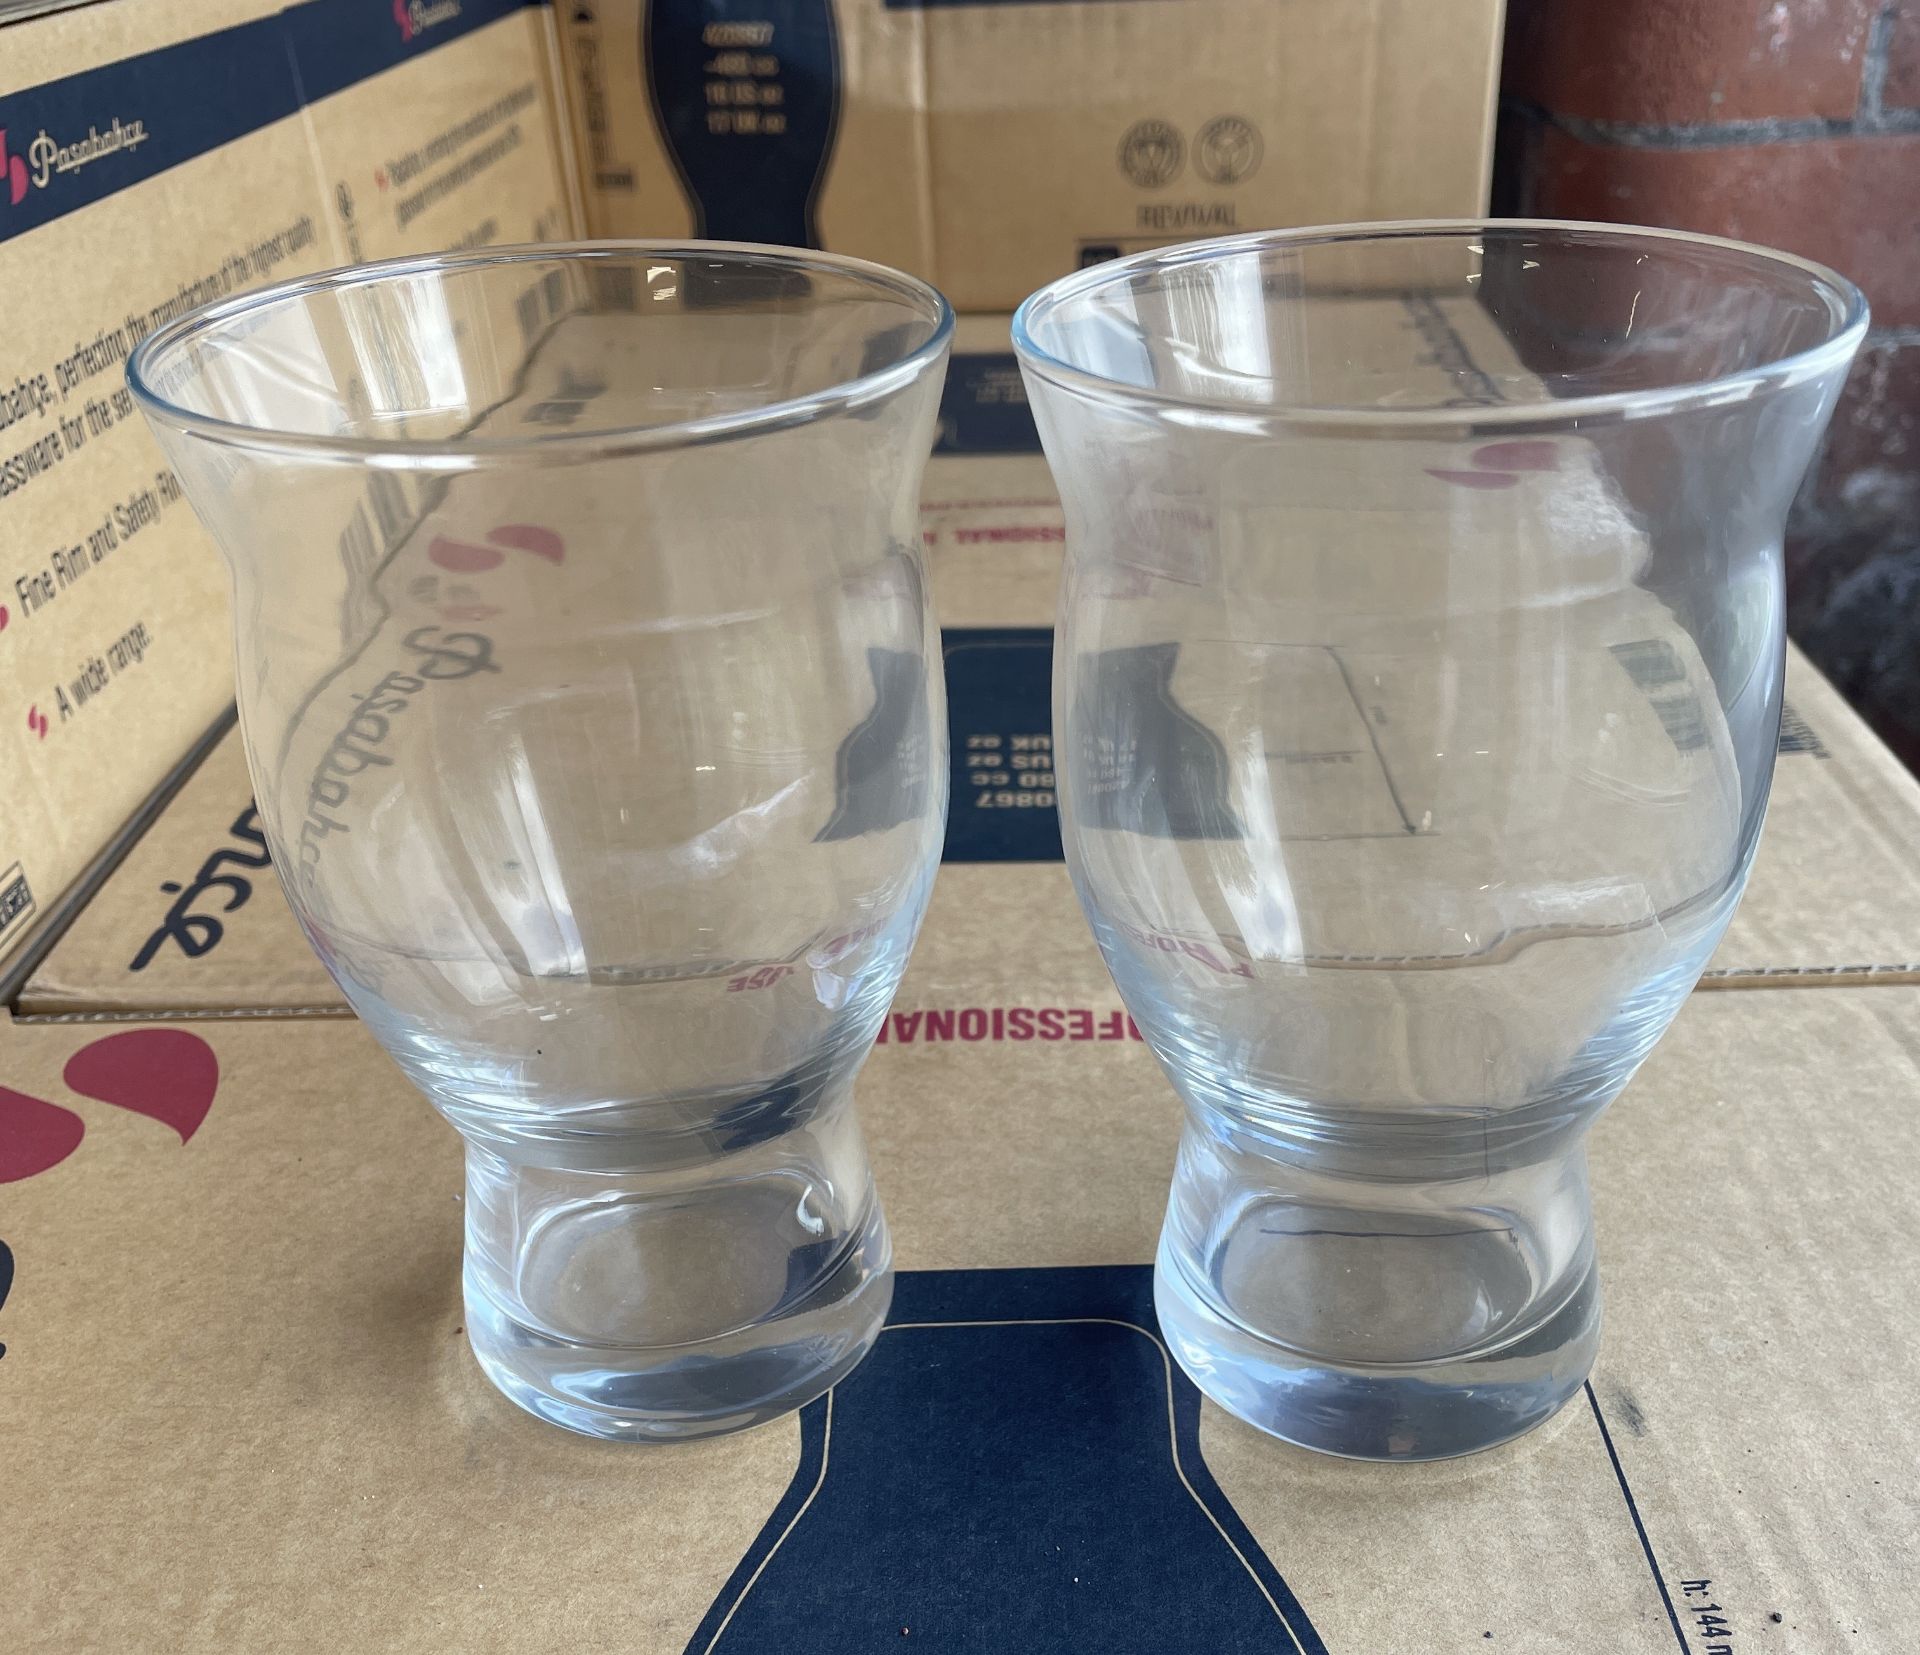 Job lot of Glasses, Whiskey tumblers, shot glasses & more - over 4000 - see description for contents - Image 13 of 13